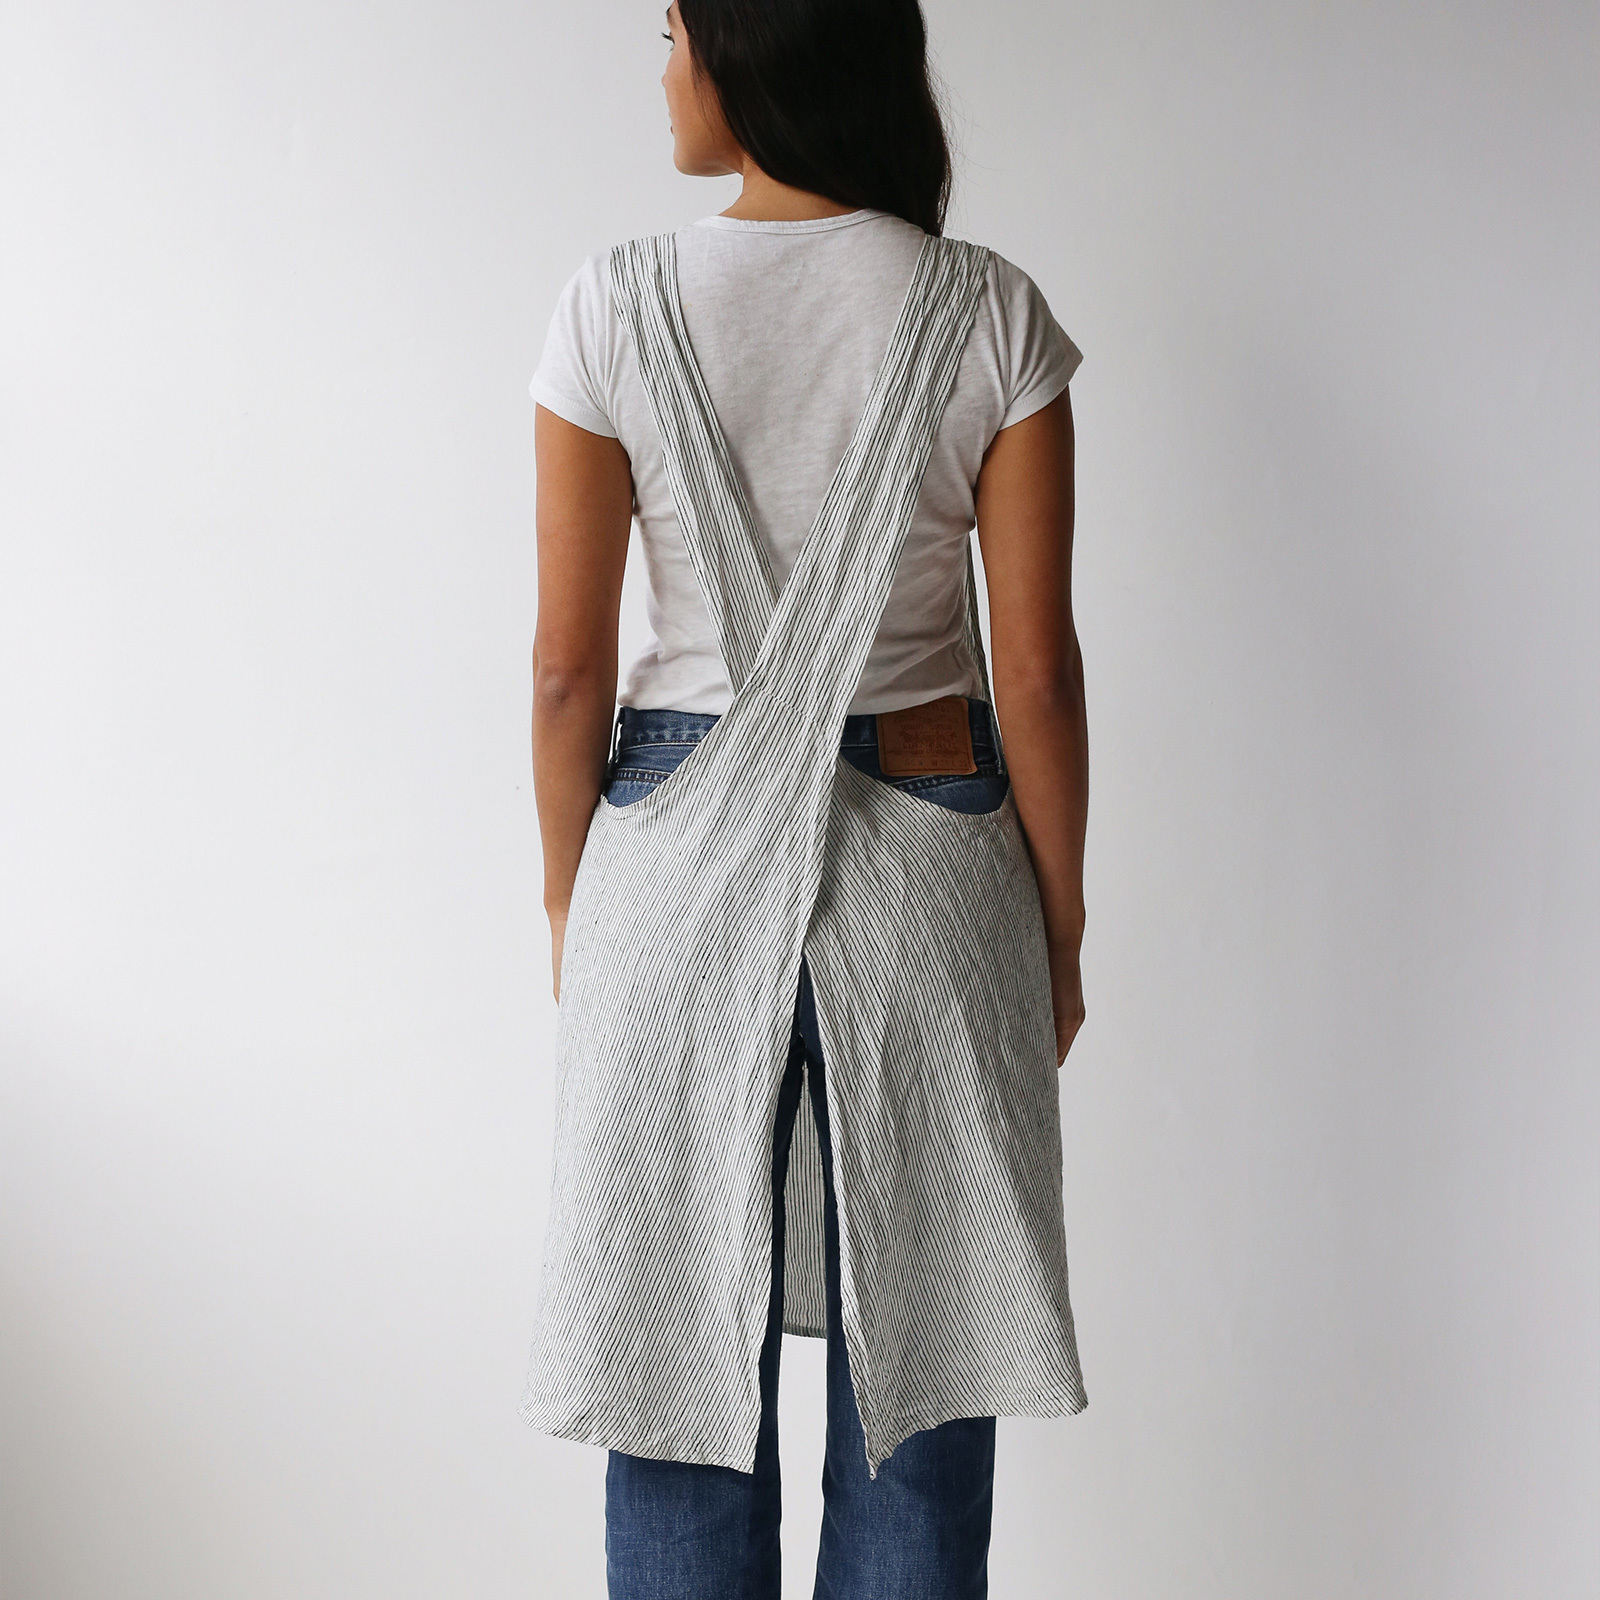 French linen Apron in Pinstripe